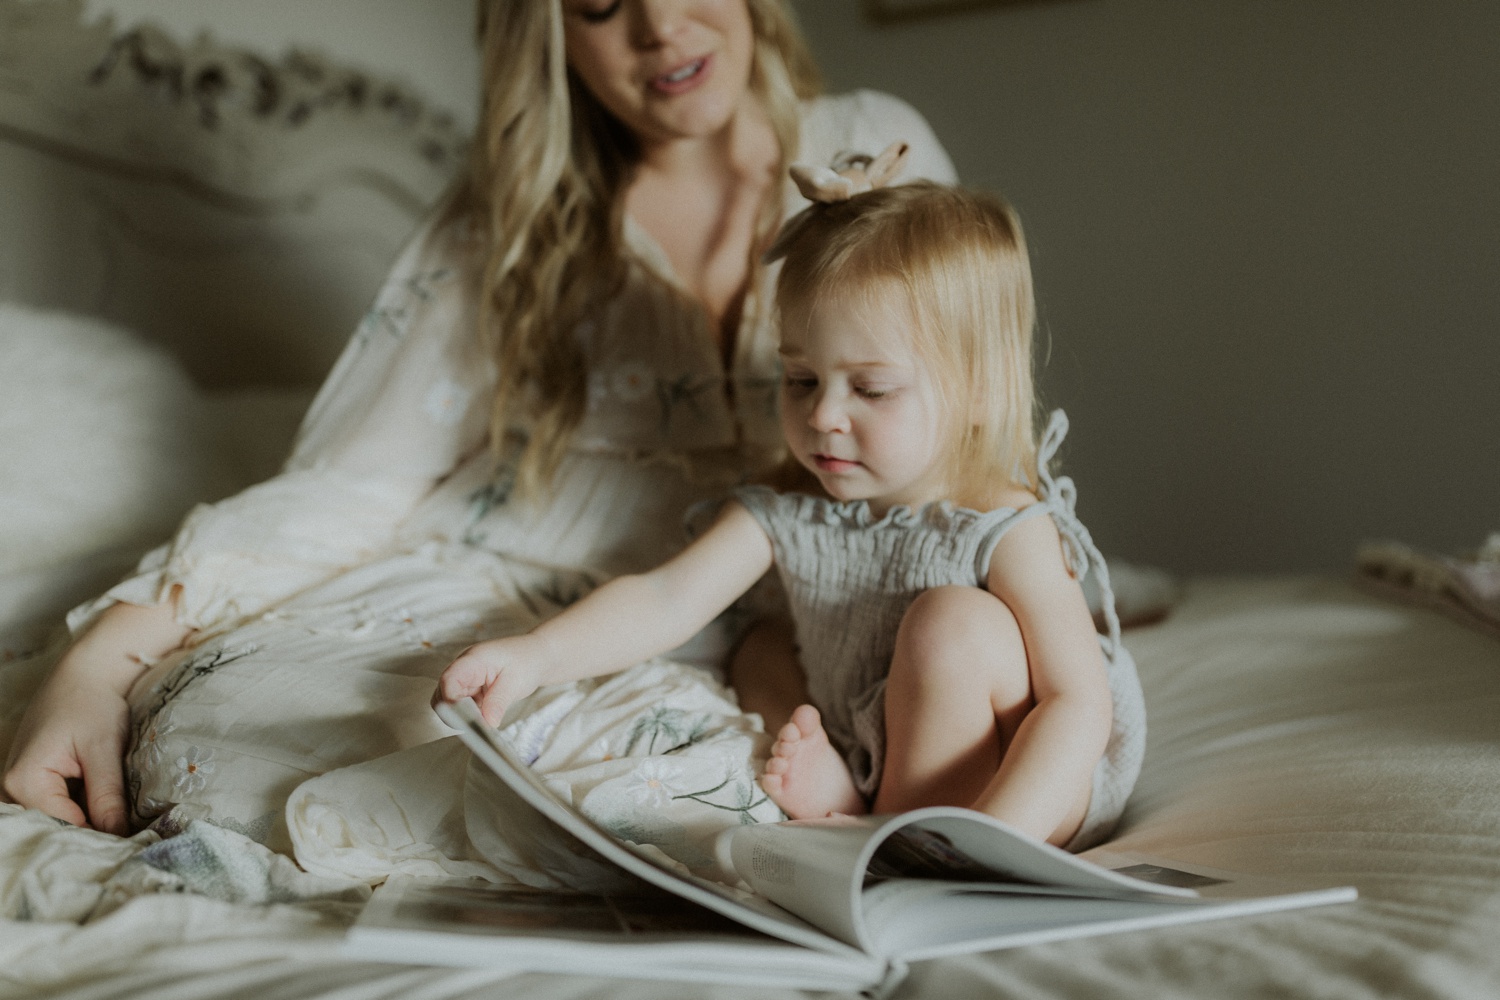 A mother sits beside a child flipping through a keepsake book on her bed.